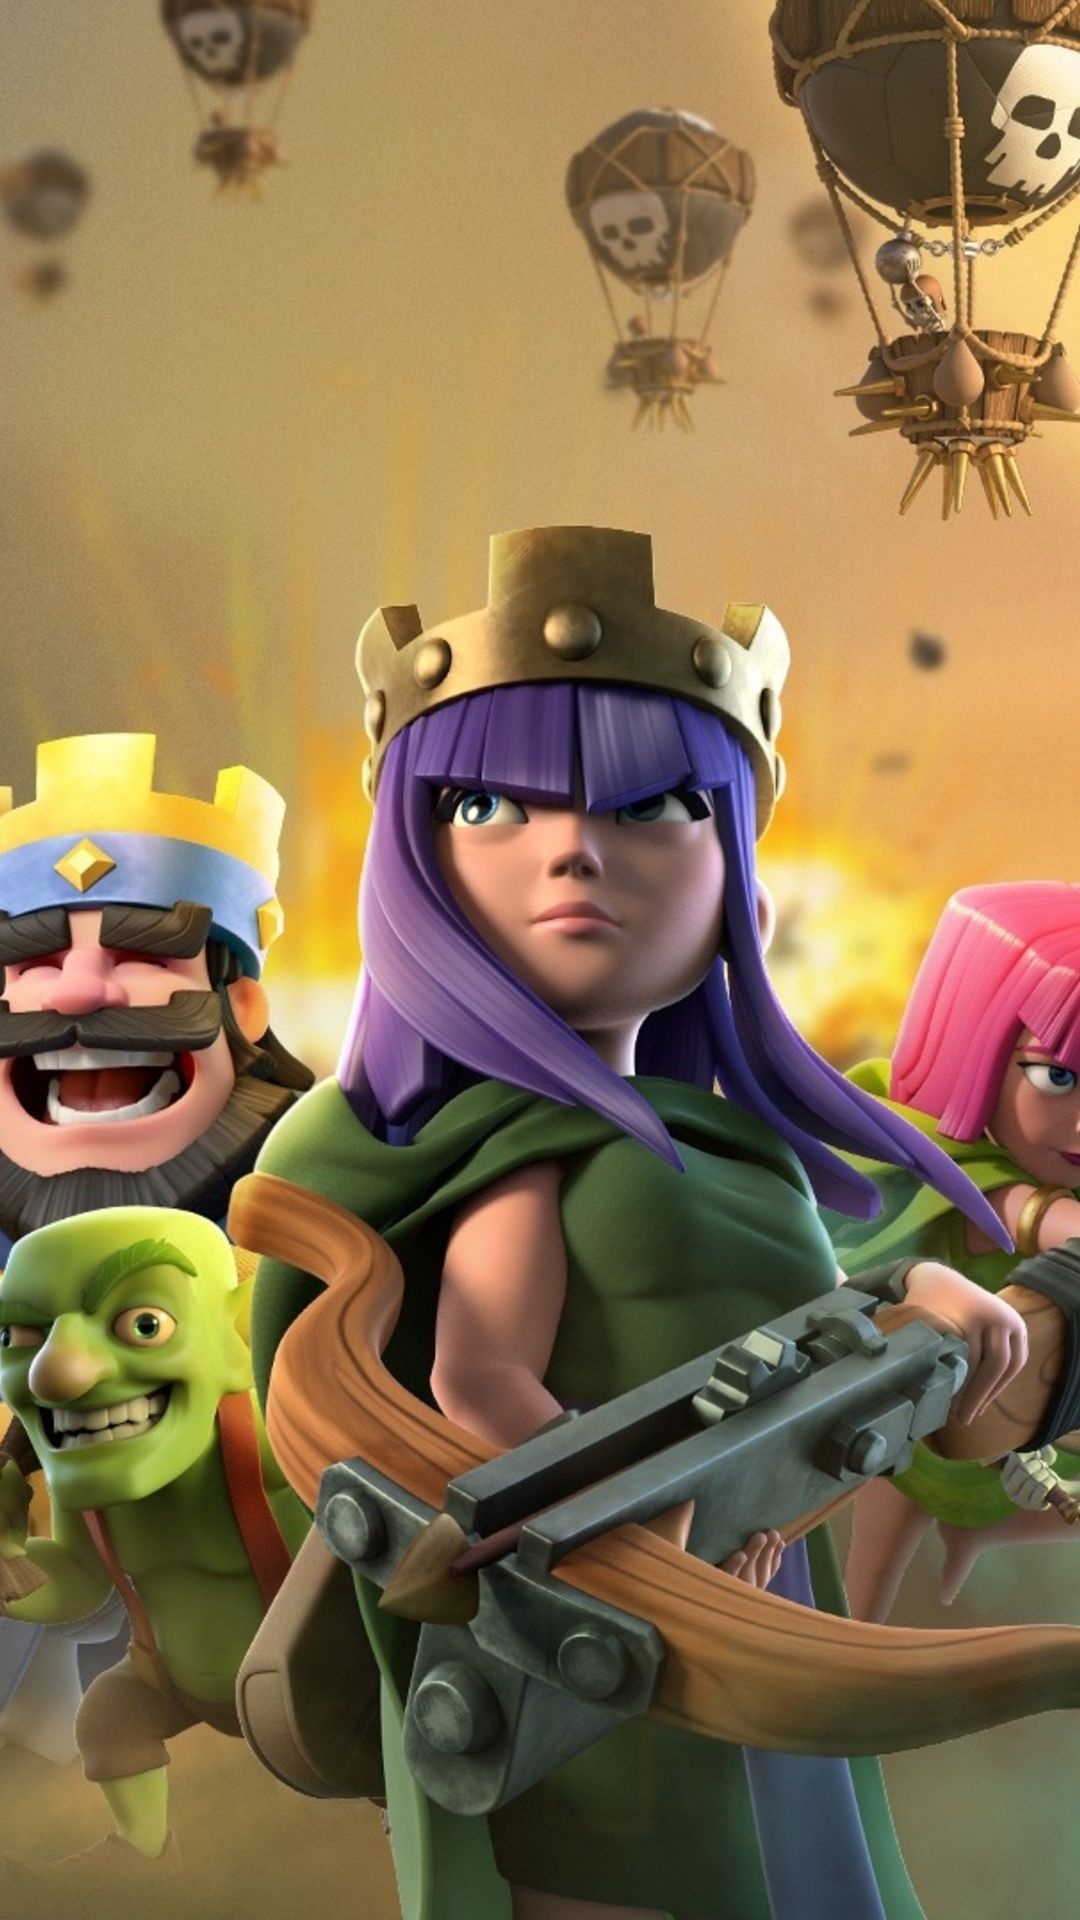 Clash of Clans: Clash Royale, The sequel to CoC and takes a different approach to gameplay. 1080x1920 Full HD Background.